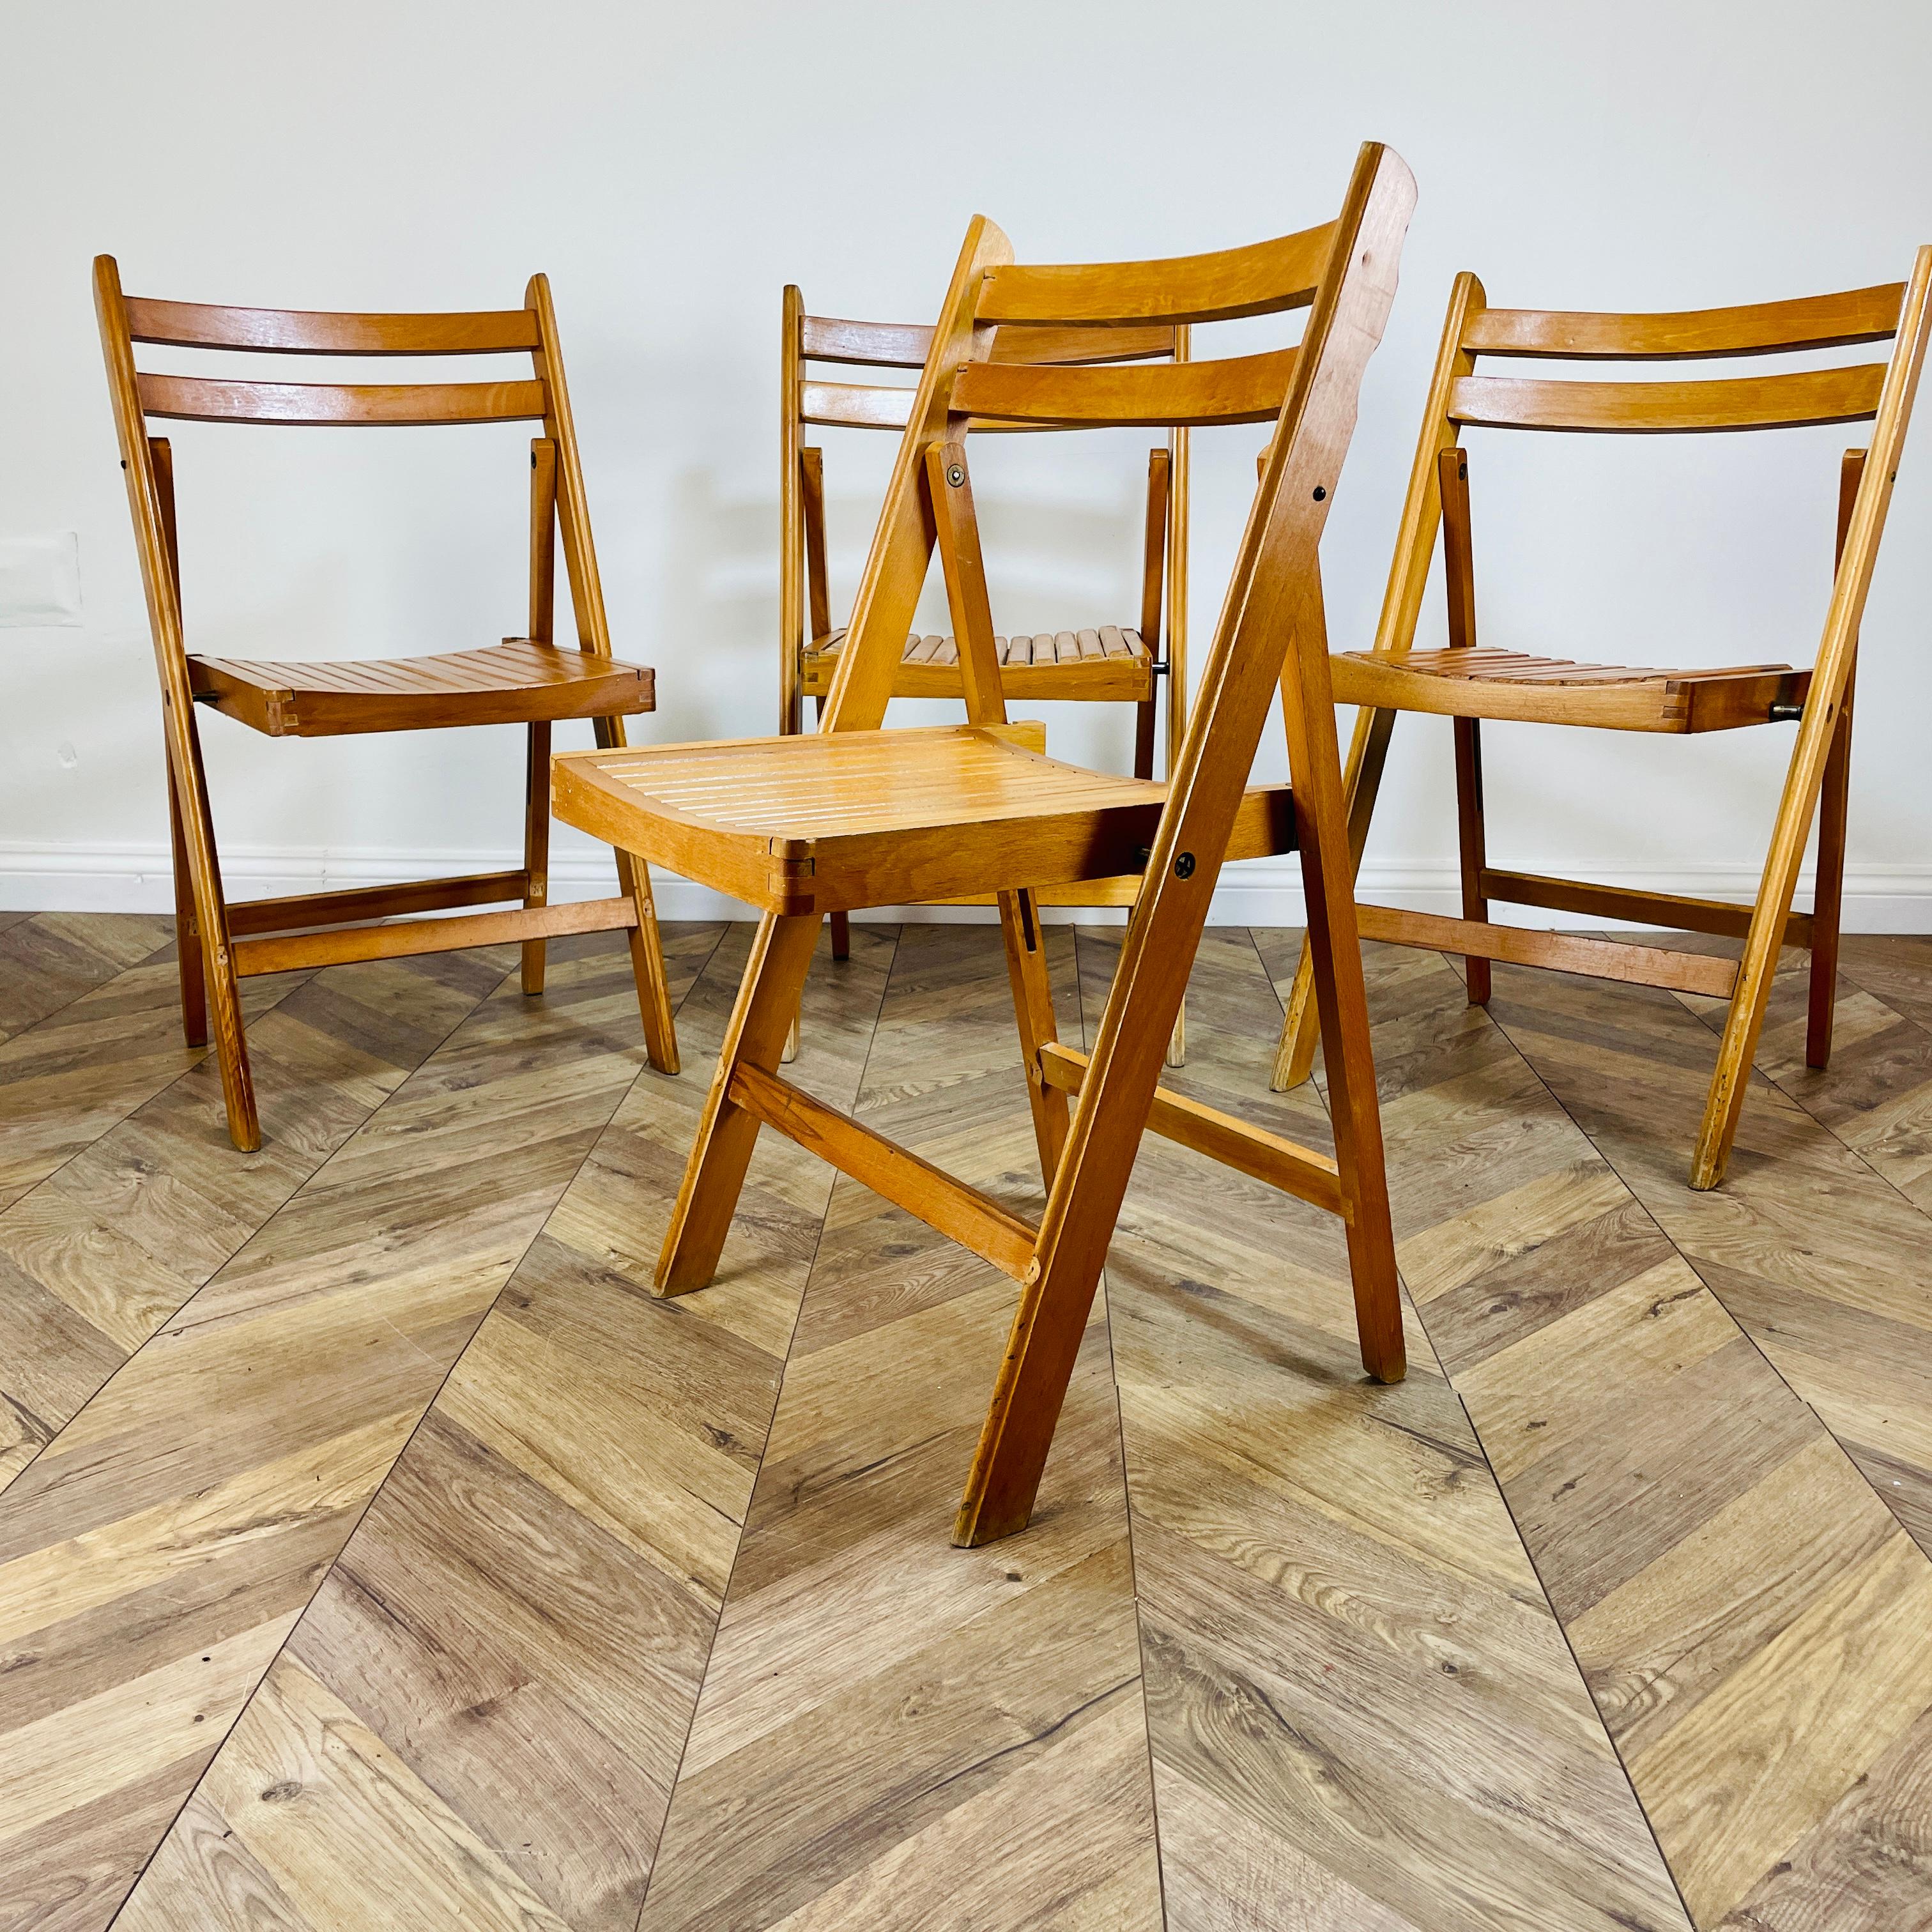 A Set of 4, midcentury Folding Chairs made by Centa in Romania, circa 1960s.

The chairs are structurally strong with slatted seats but do show signs of use with minor scuffs and marks to both frame and seats, as pictured.

.